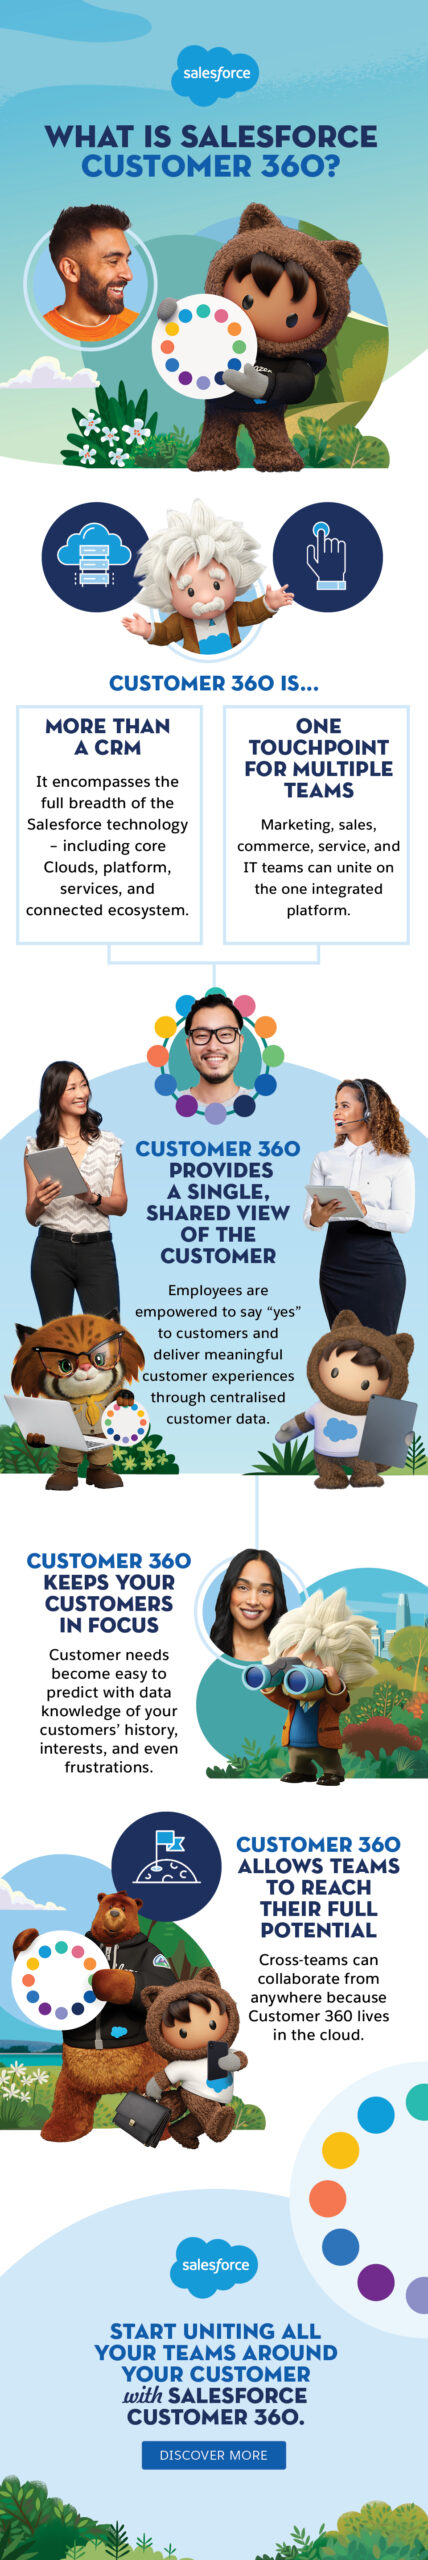 What Is Salesforce 360 infographic